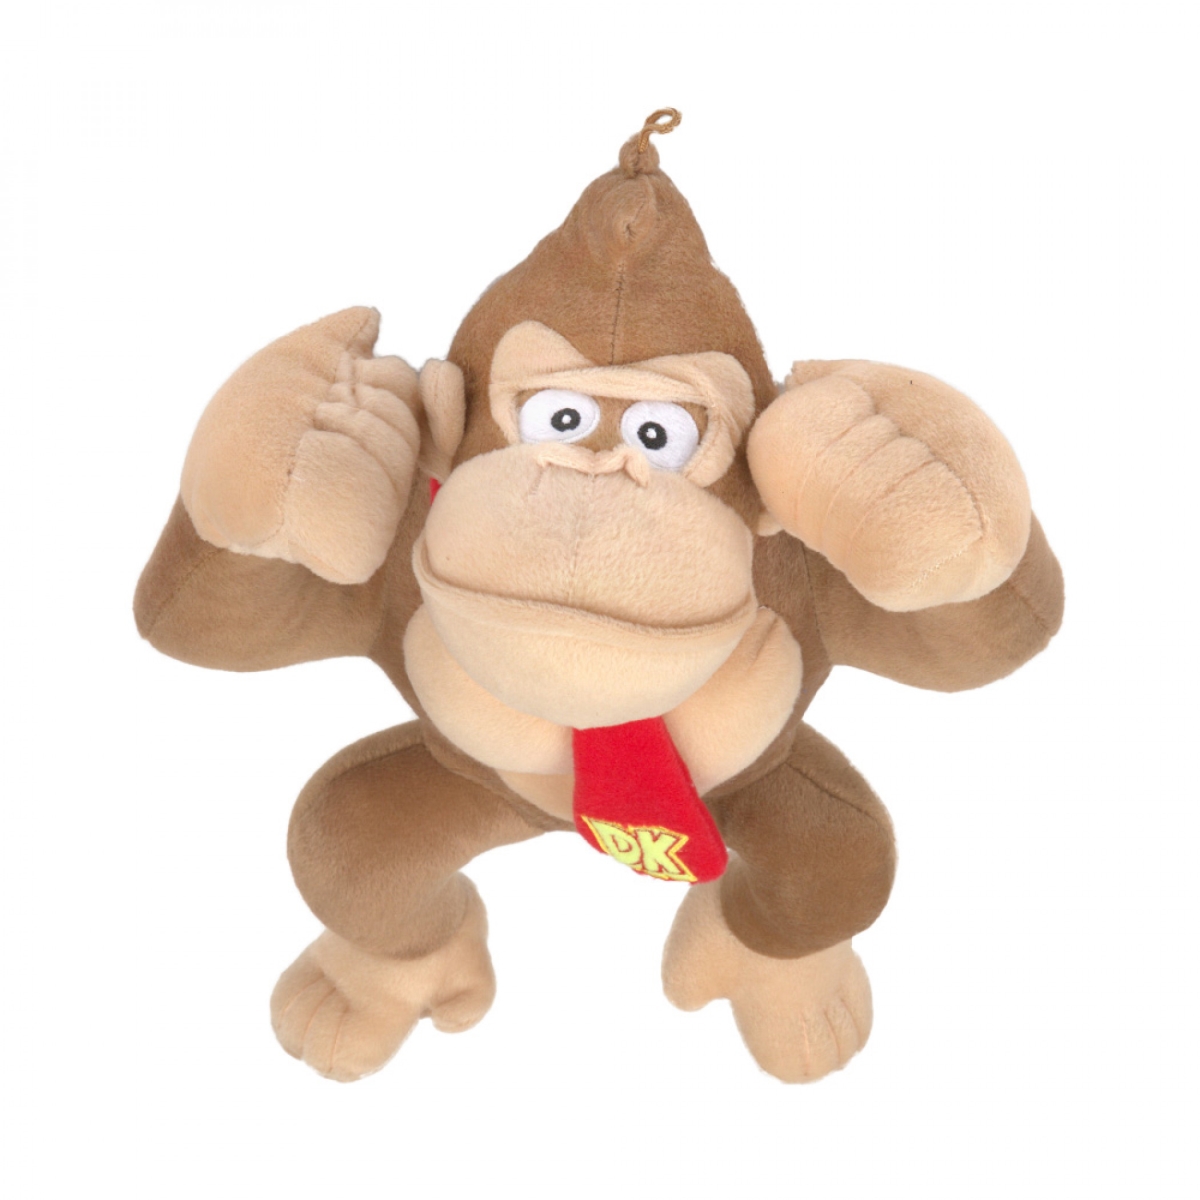 Picture of Donkey Kong 853686 15 in. Plush Doll